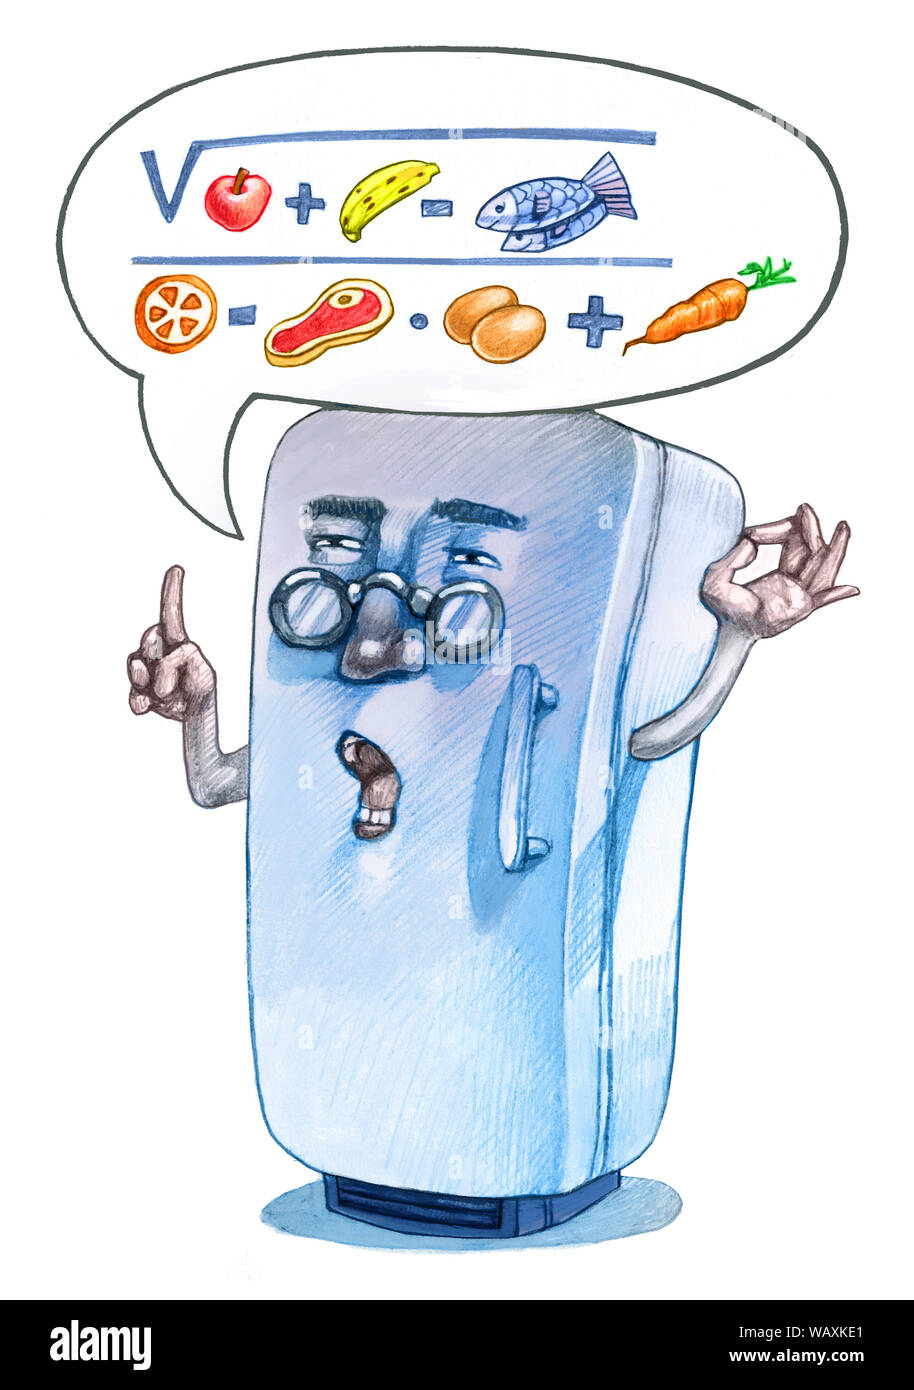 fridge talks about feeding and remembers foods on expiration allegory of smart fridge humorous character design pencil illustration Stock Photo